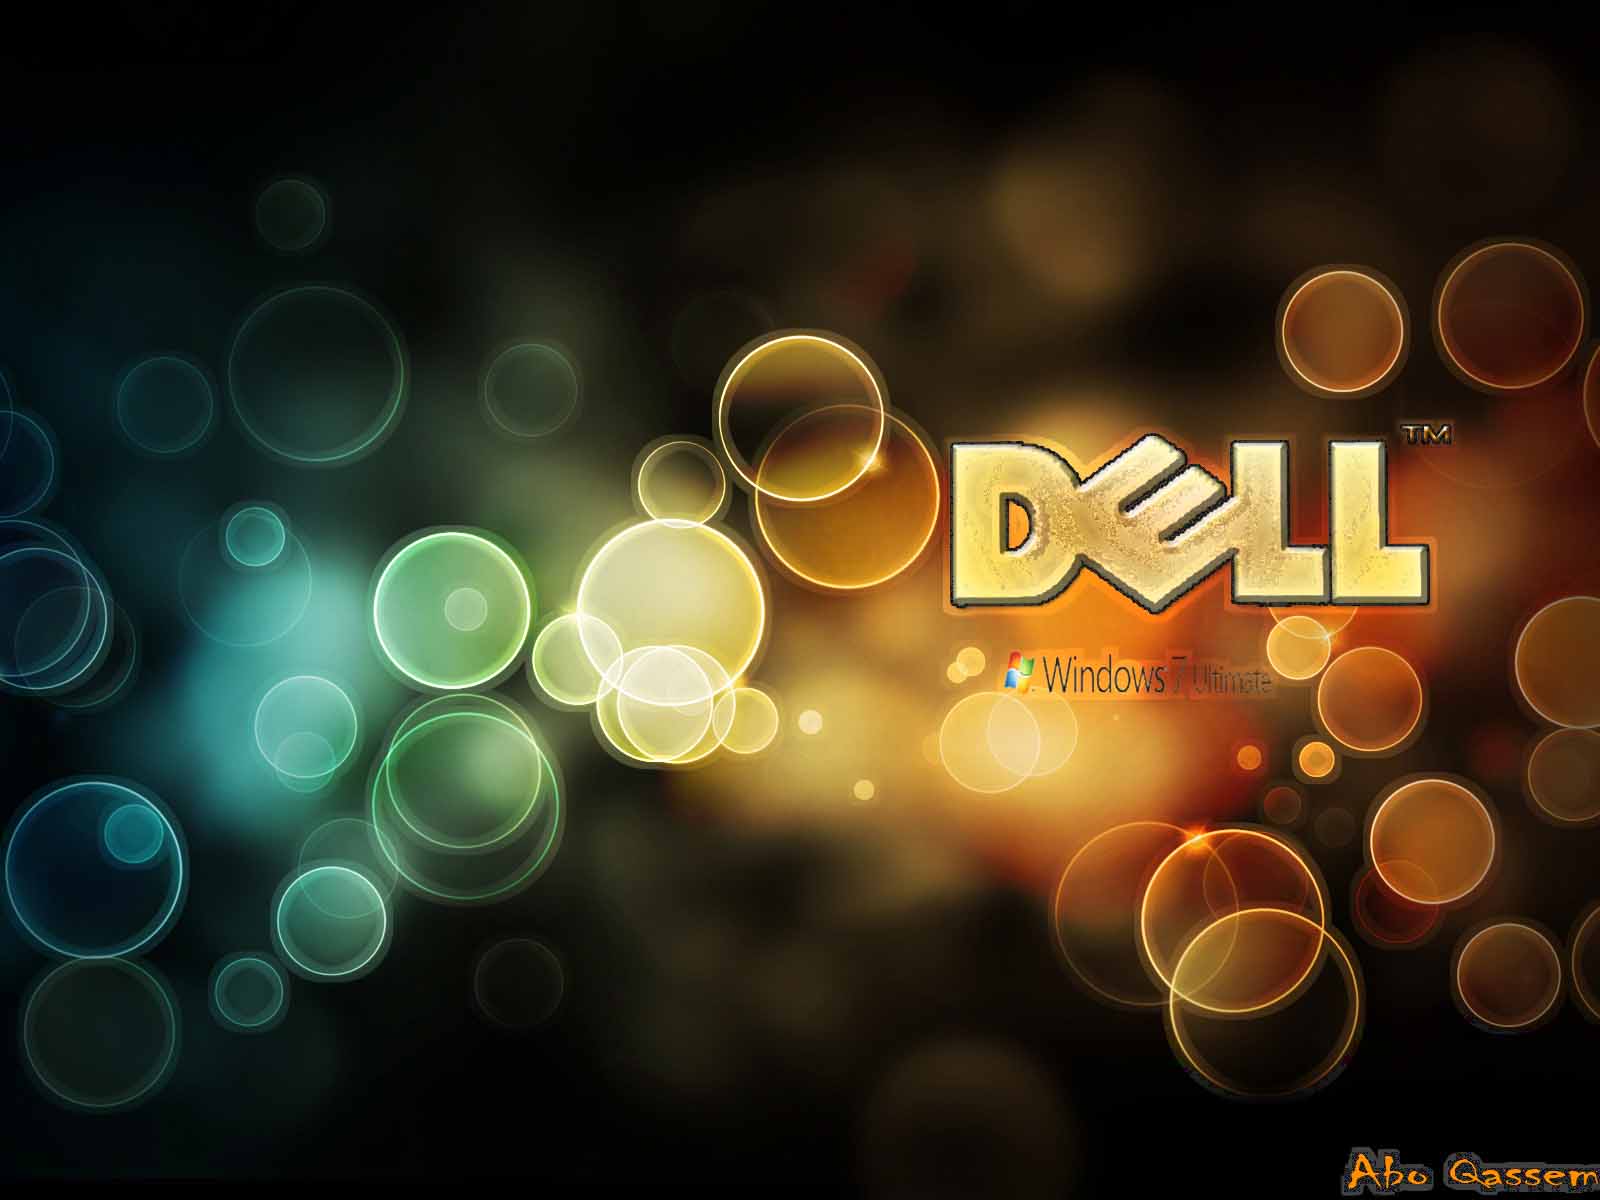 Wallpapers Sky: Laptop Dell Wallpapers